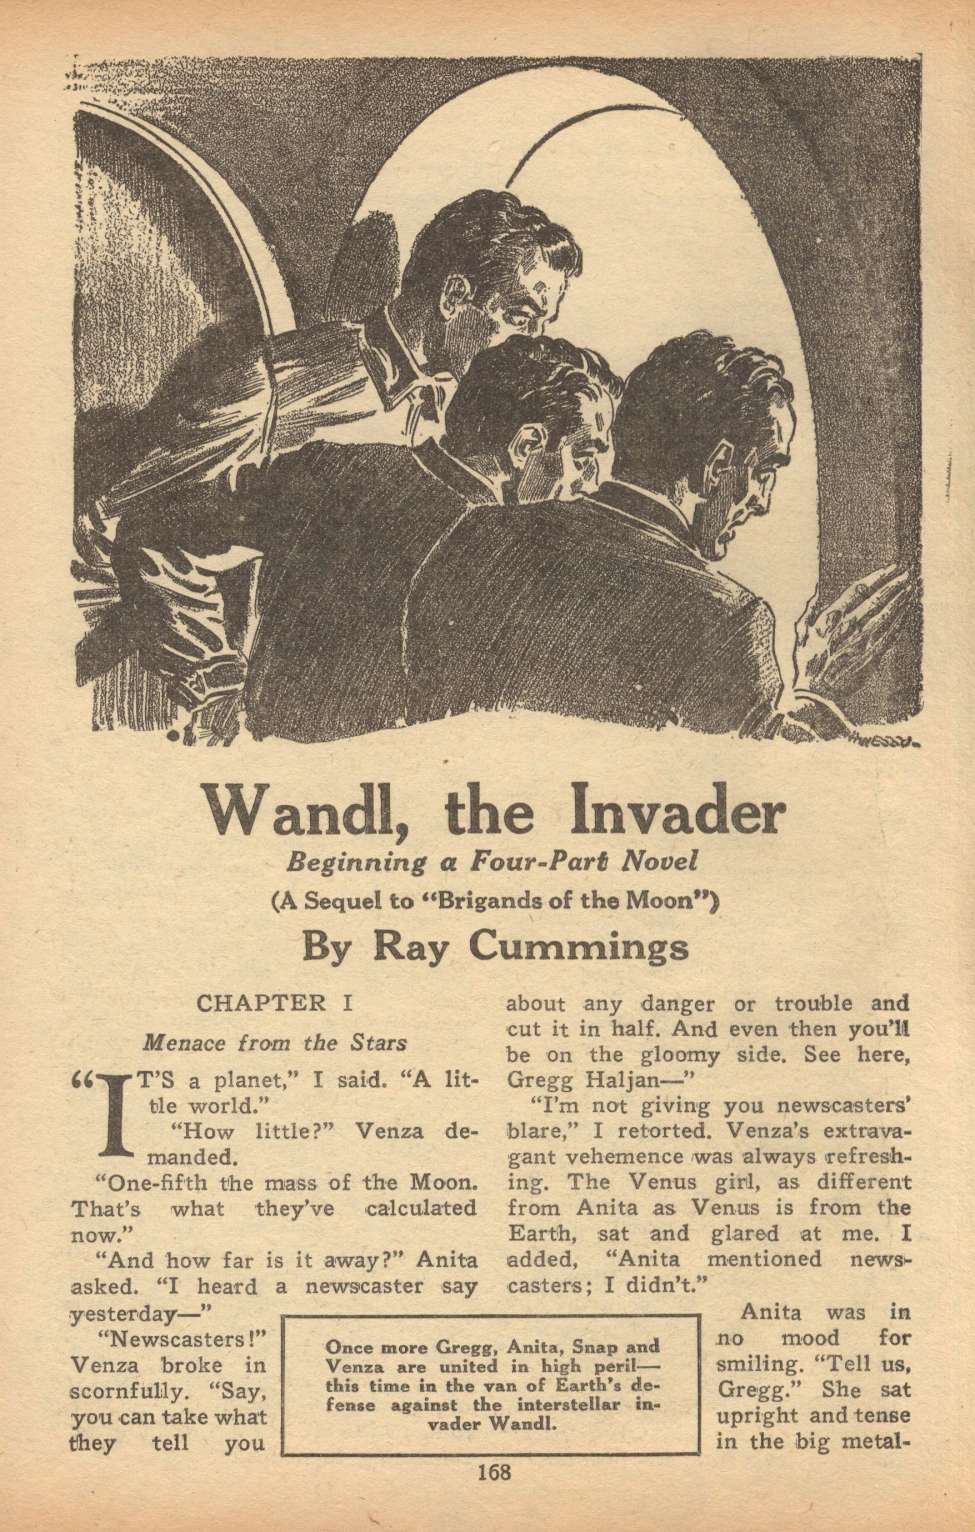 Book Cover For Astounding Serial - Wandl, the Invader - R Cummings